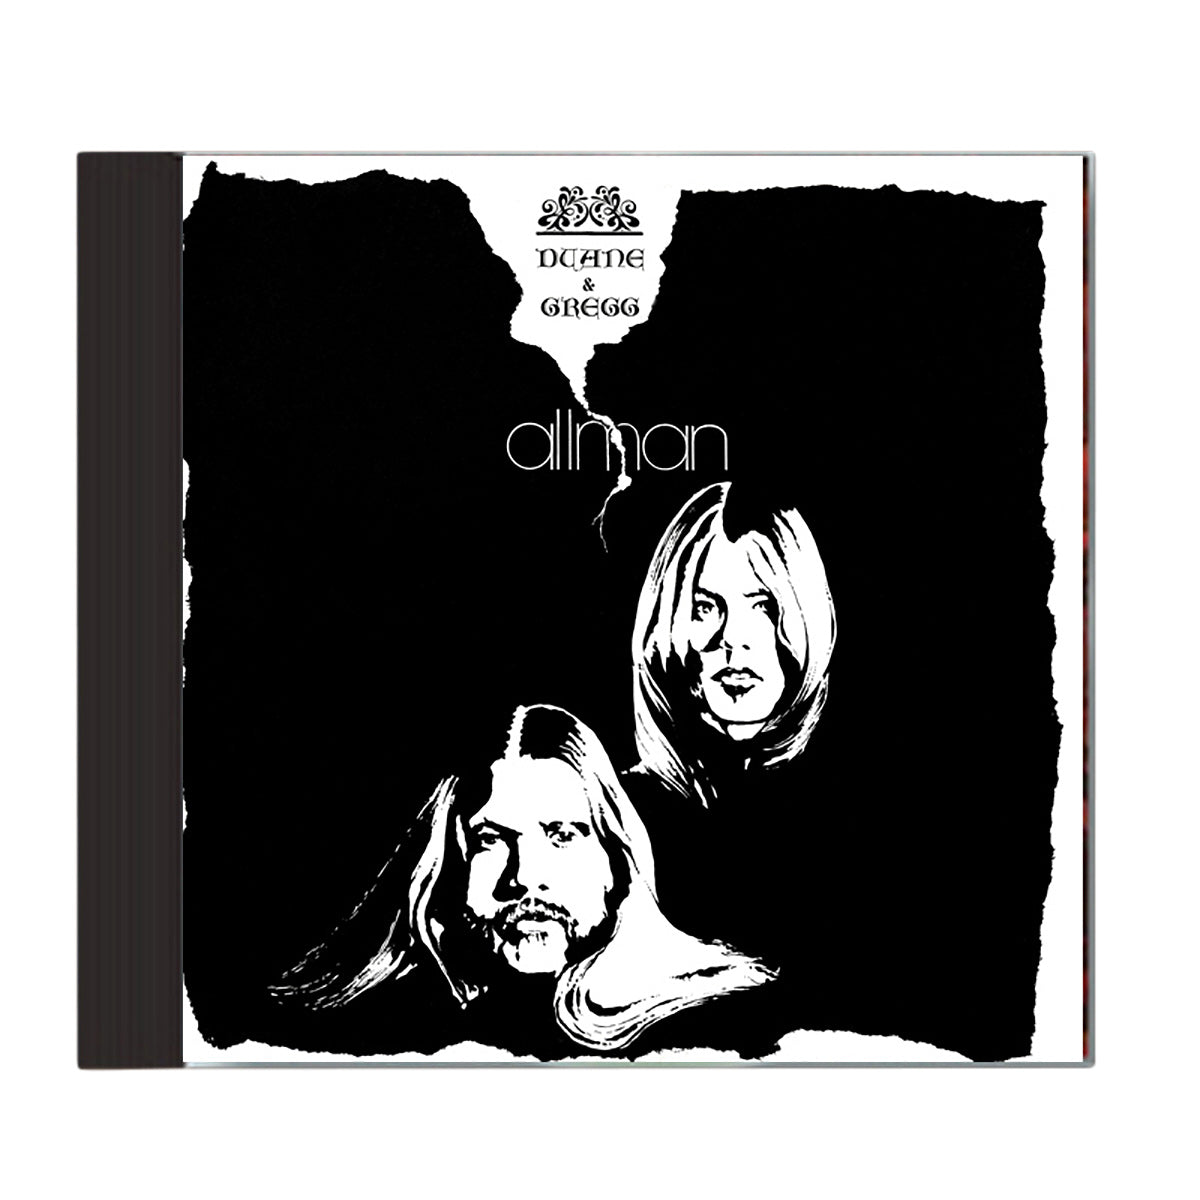 Duane and Greg 1972 Rerelease CD